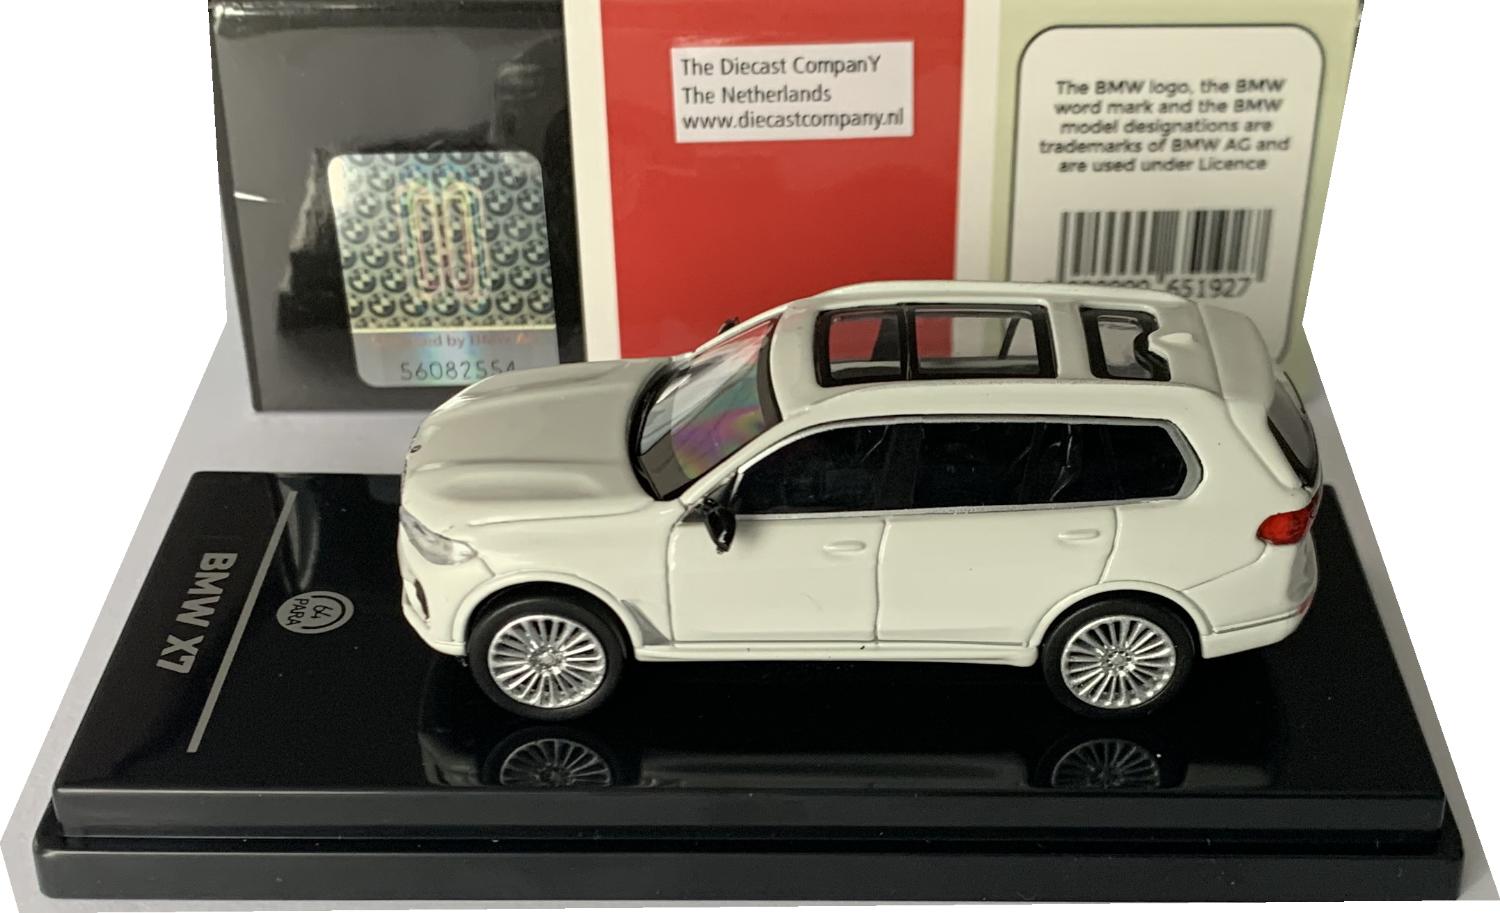 BMW X7 in white 1:64 scale model from Paragon Models